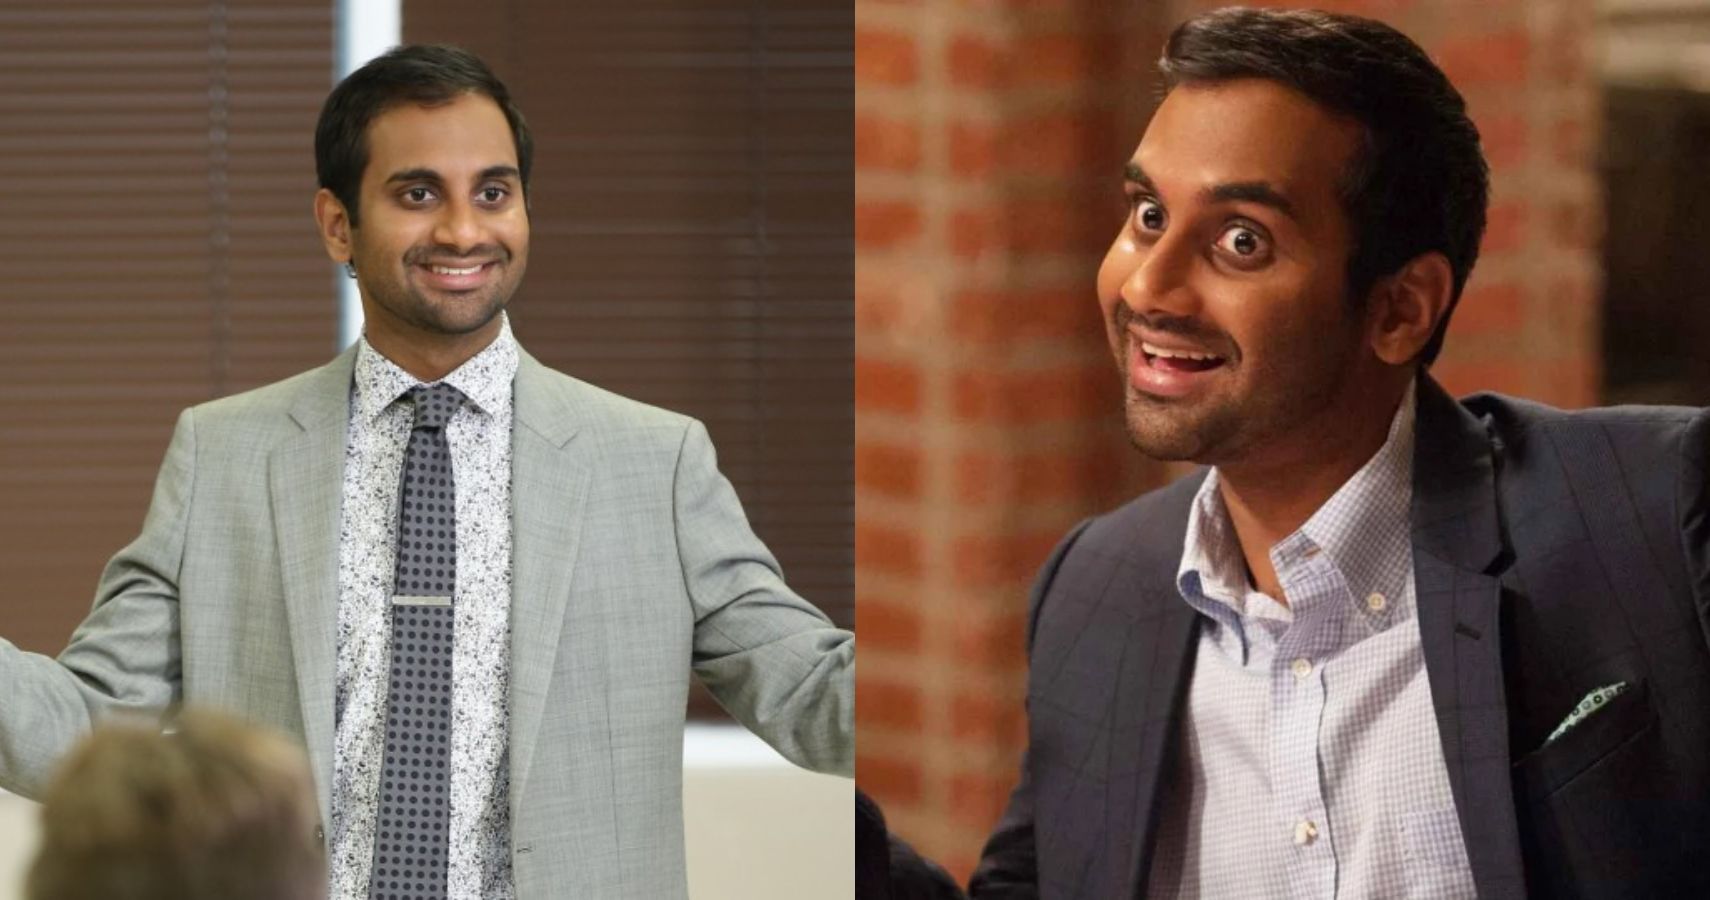 Tom Haverford with his arms out/Smiling at the camera